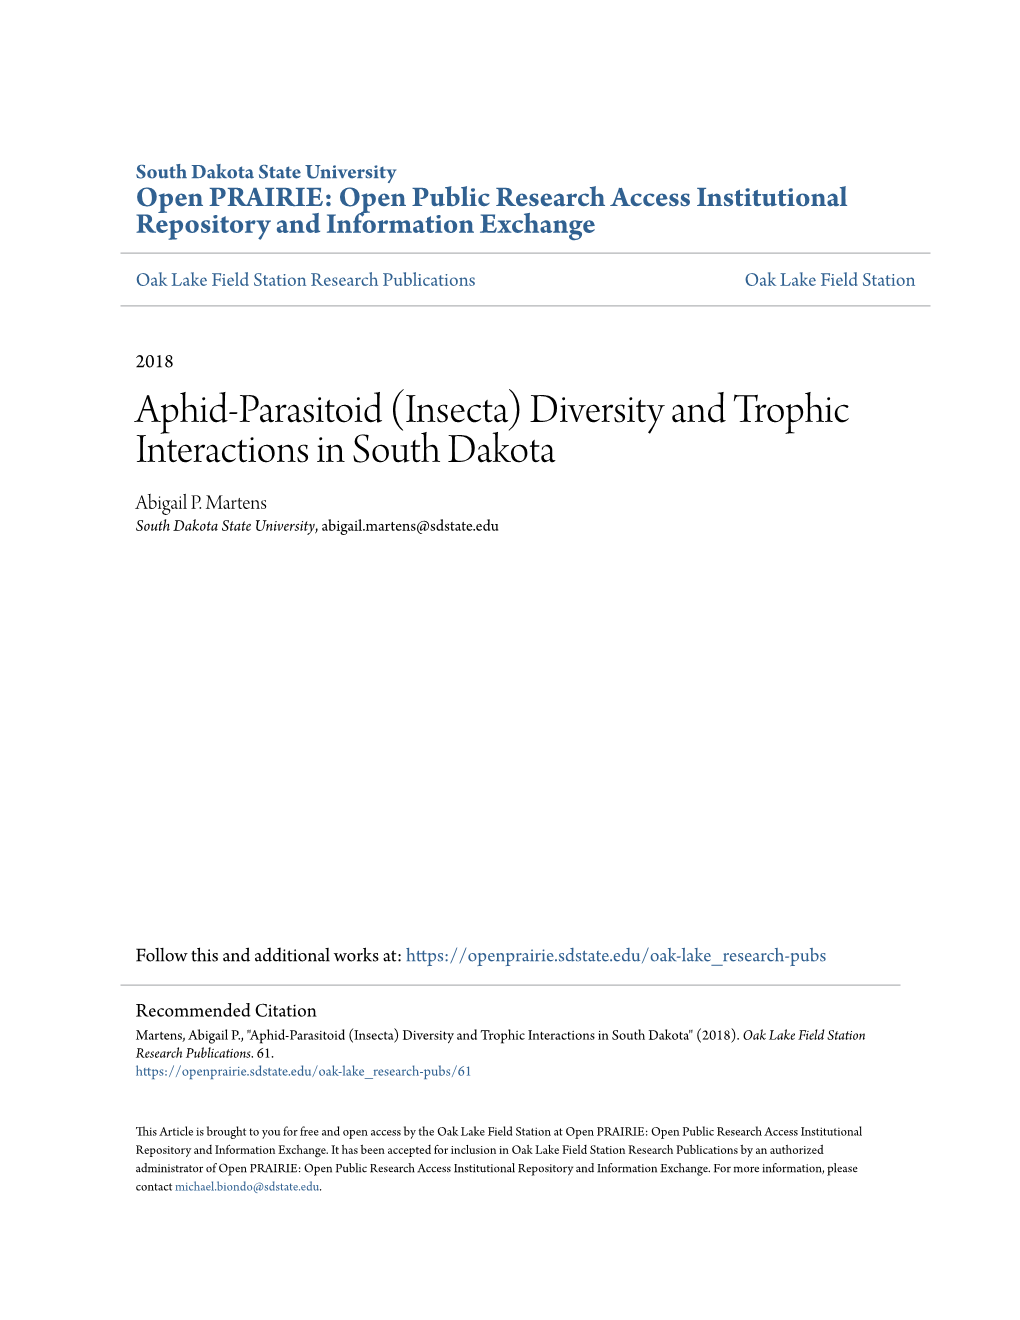 Aphid-Parasitoid (Insecta) Diversity and Trophic Interactions in South Dakota Abigail P